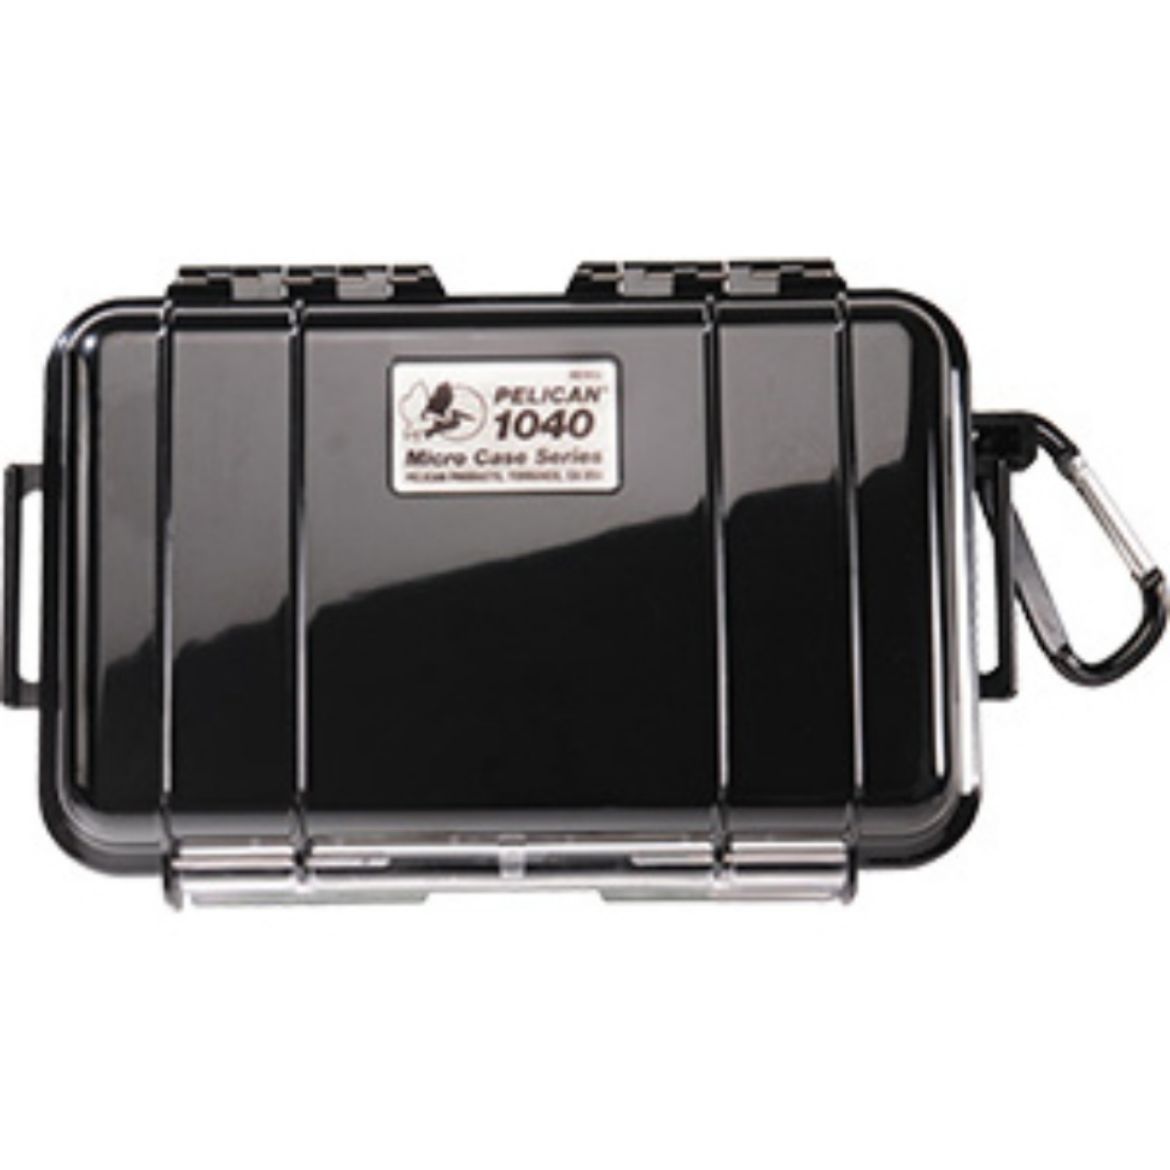 Picture of # 1040 MICRO PELICAN CASE - BLACK WITH BLACK